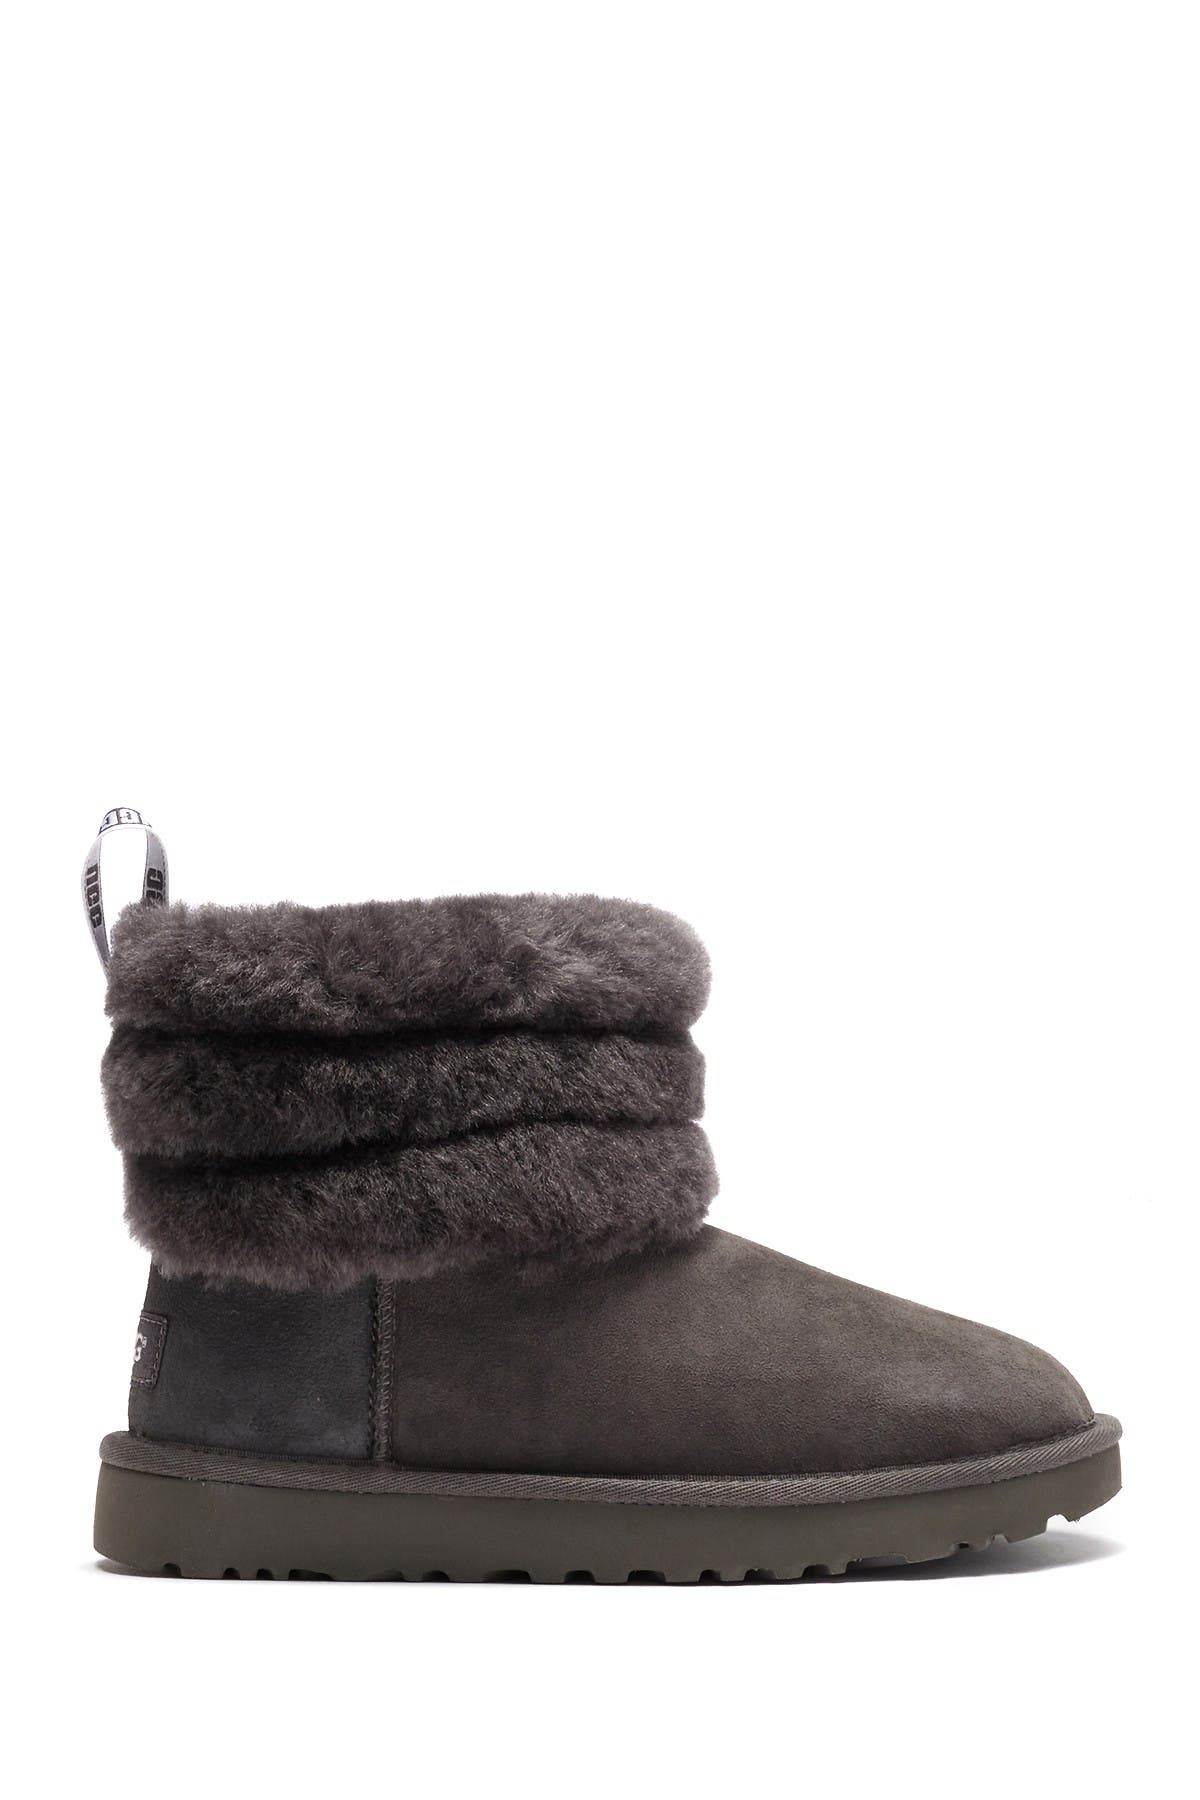 UGG | Classic Mini Genuine Shearling Fluff Quilted Boot | Nordstrom Rack